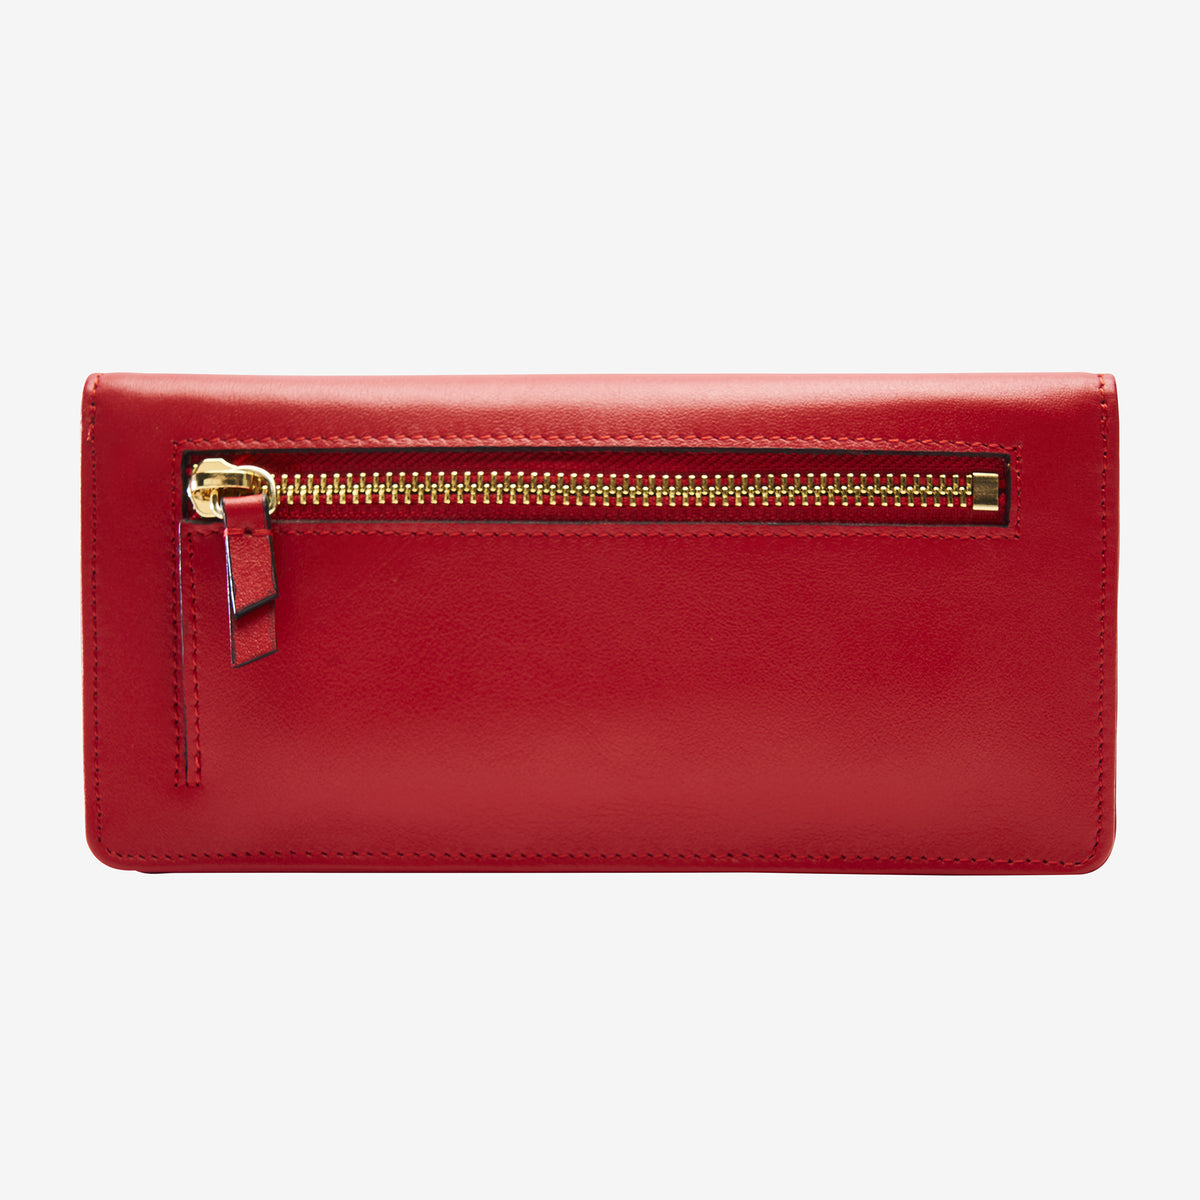 tusk-434-leather-clutch-wallet-red-back